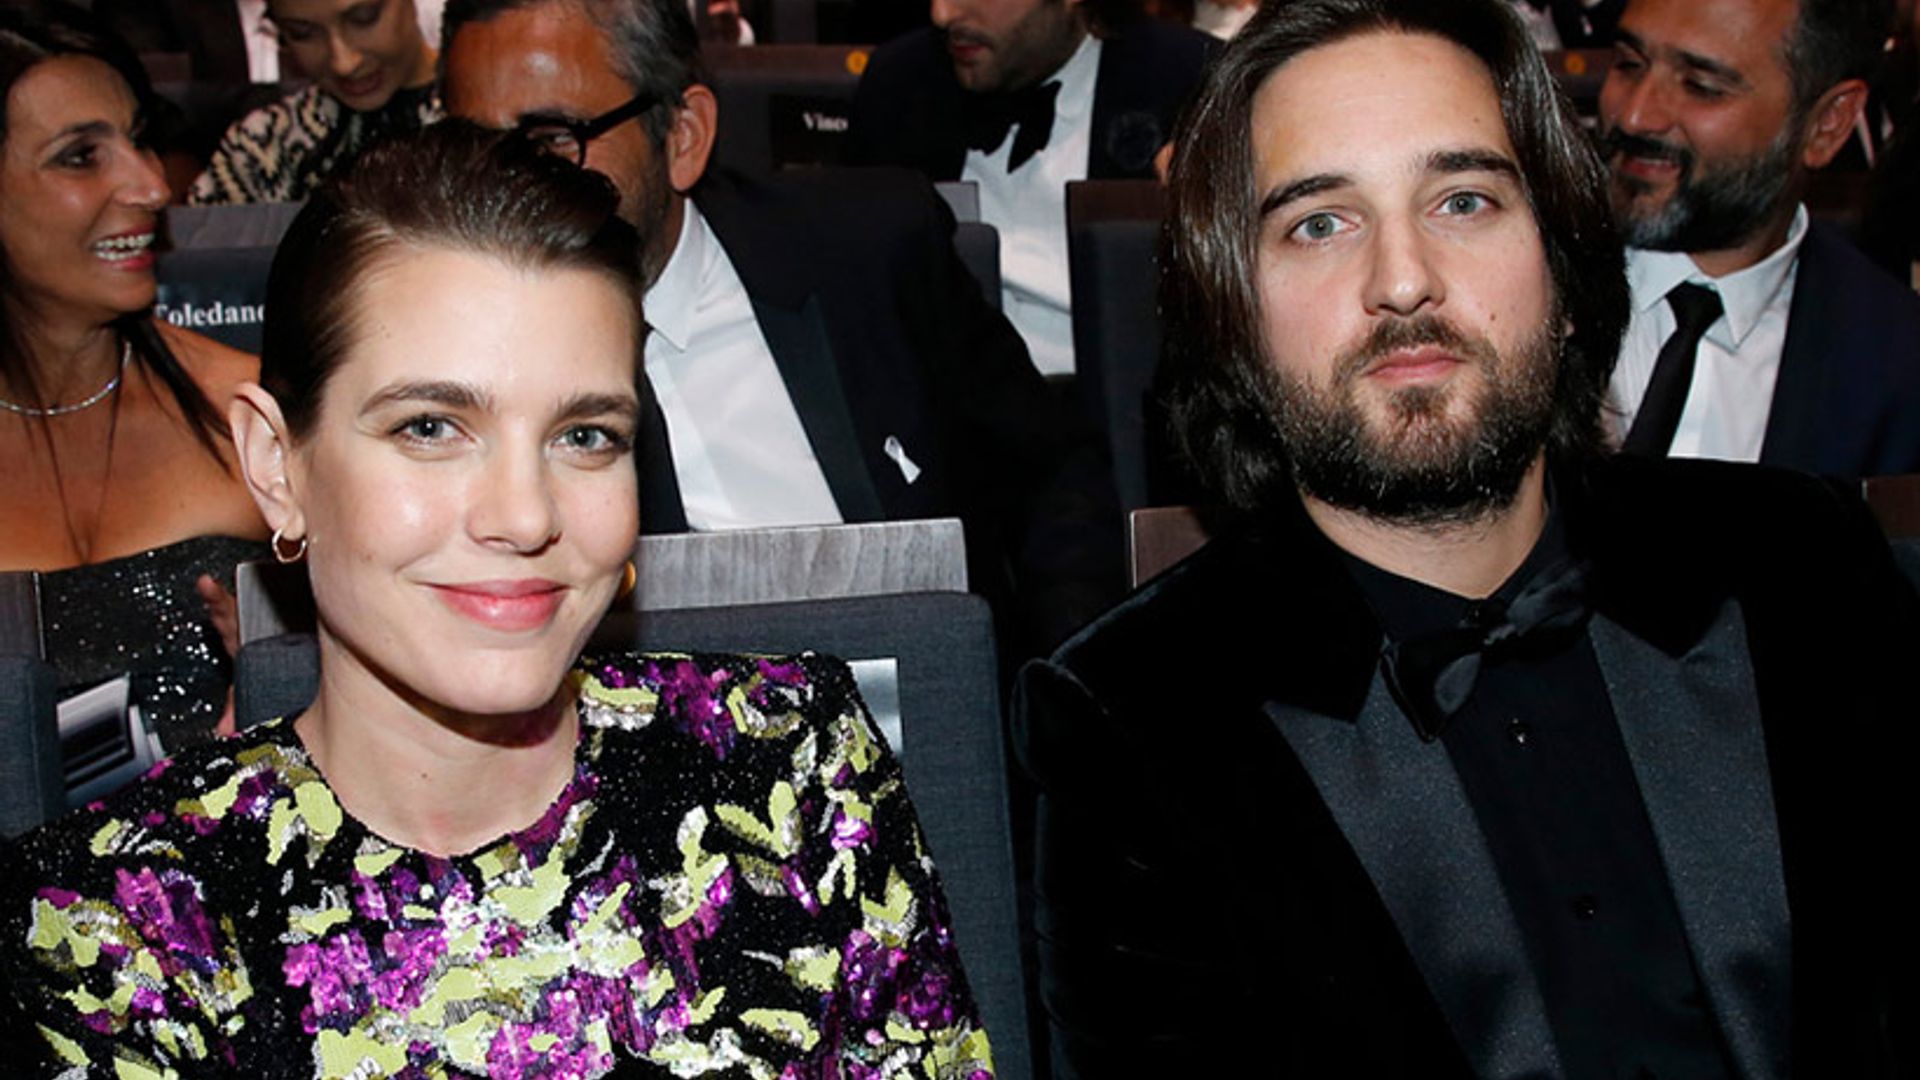 Is Charlotte Casiraghi expecting her second child?